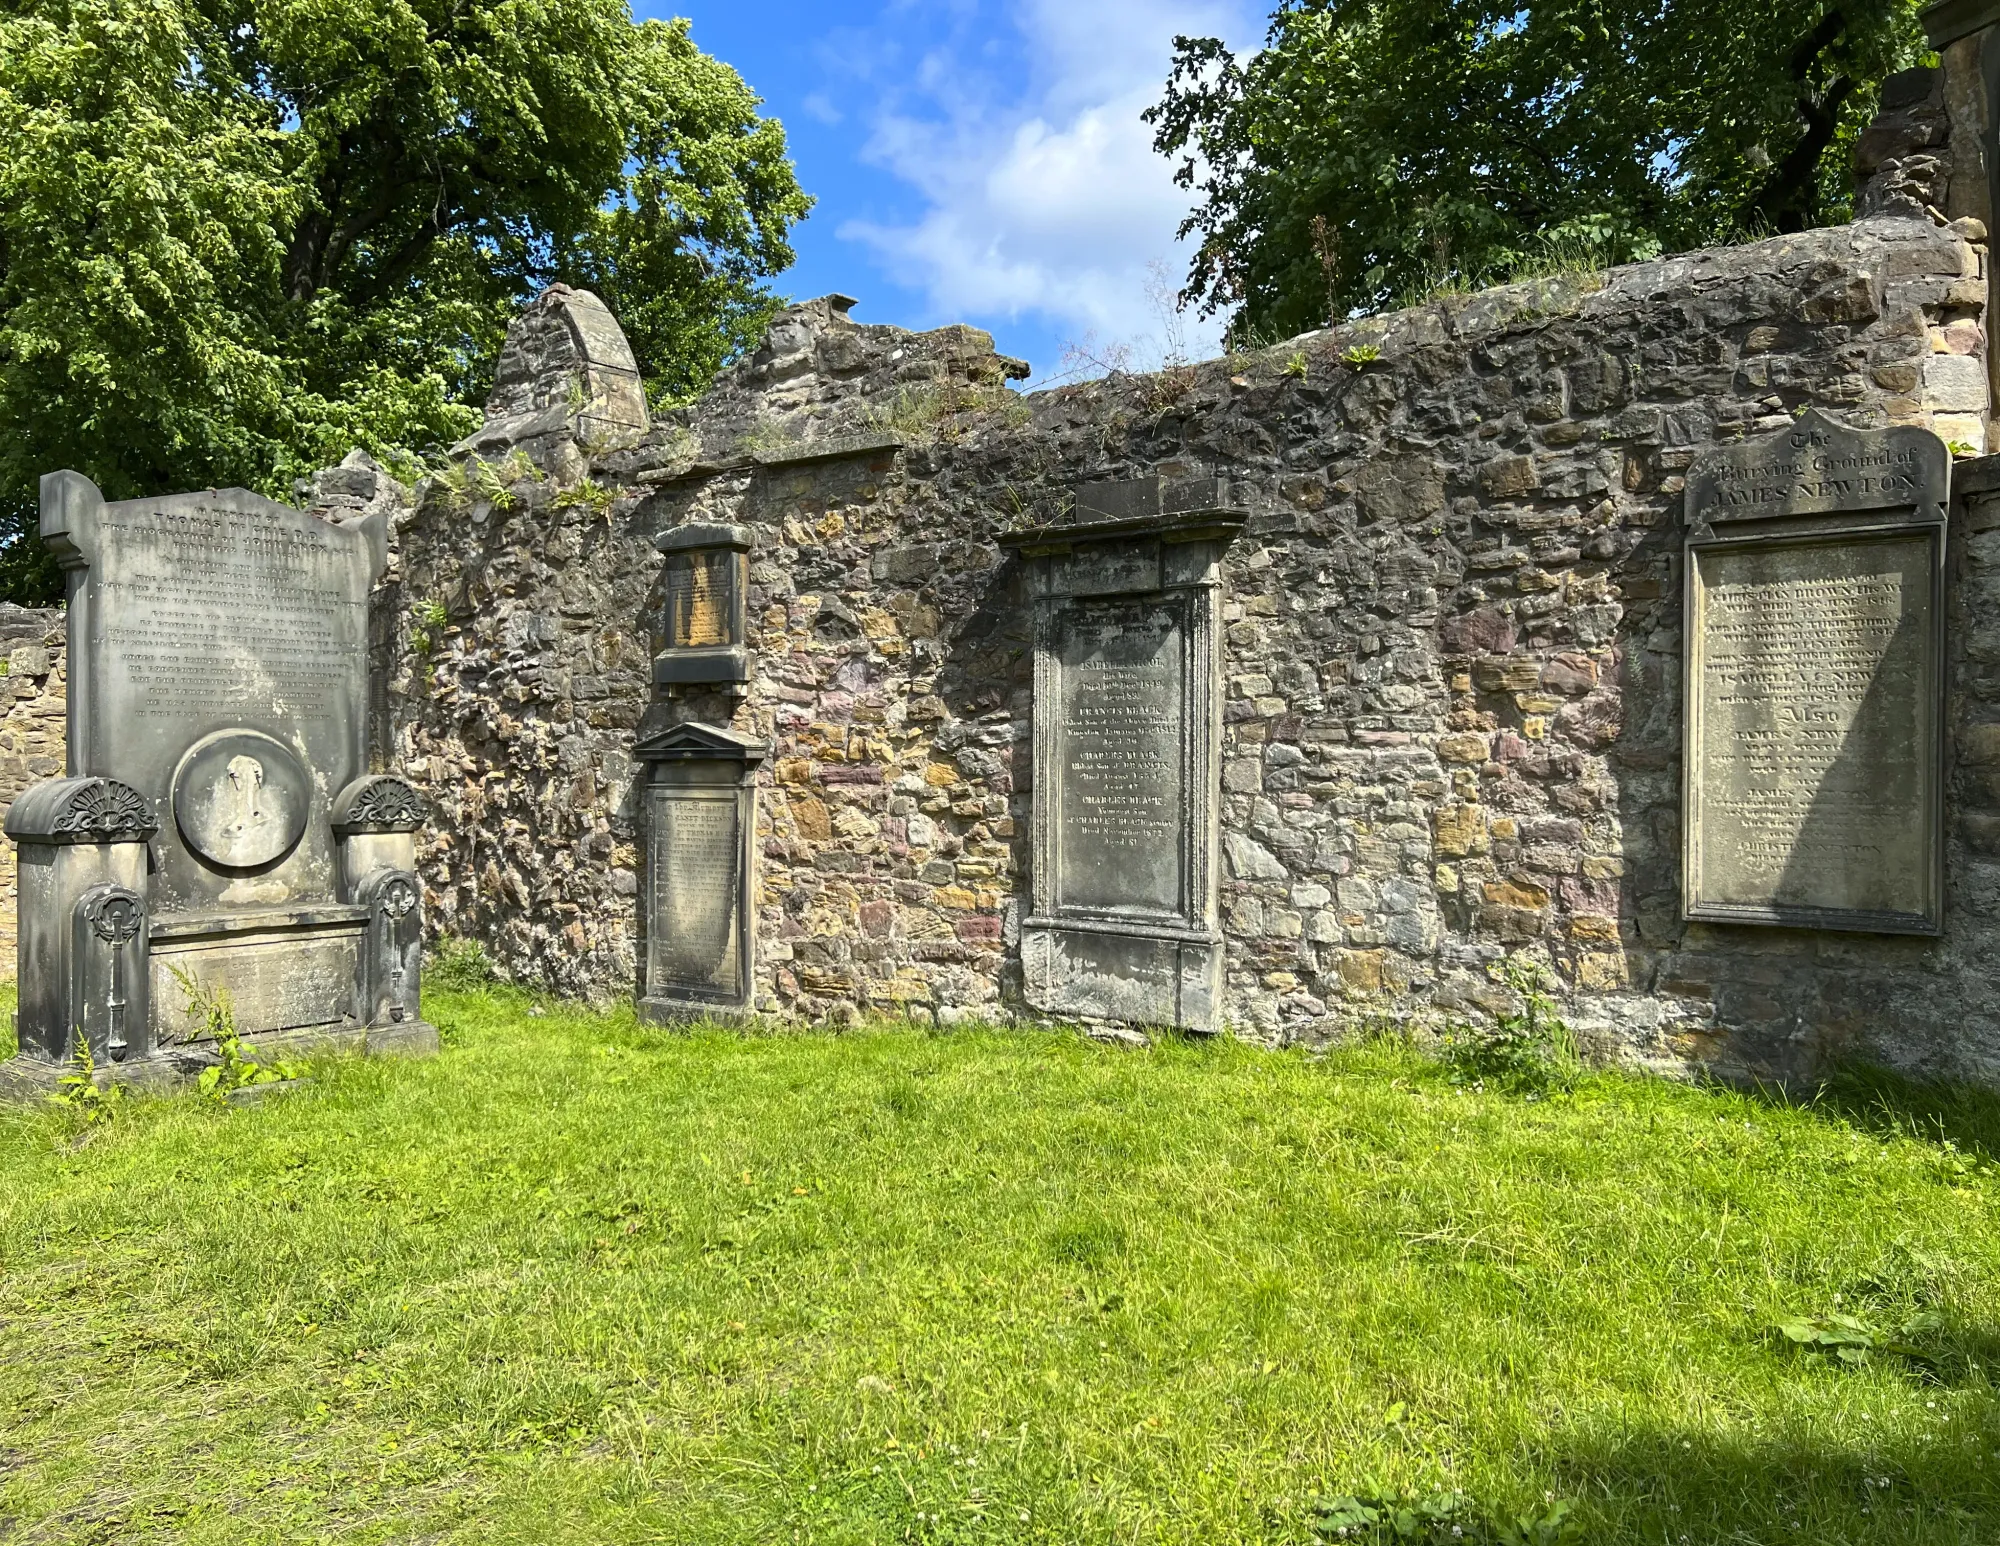 Green cemetery with tombstones embedded in a stone wall